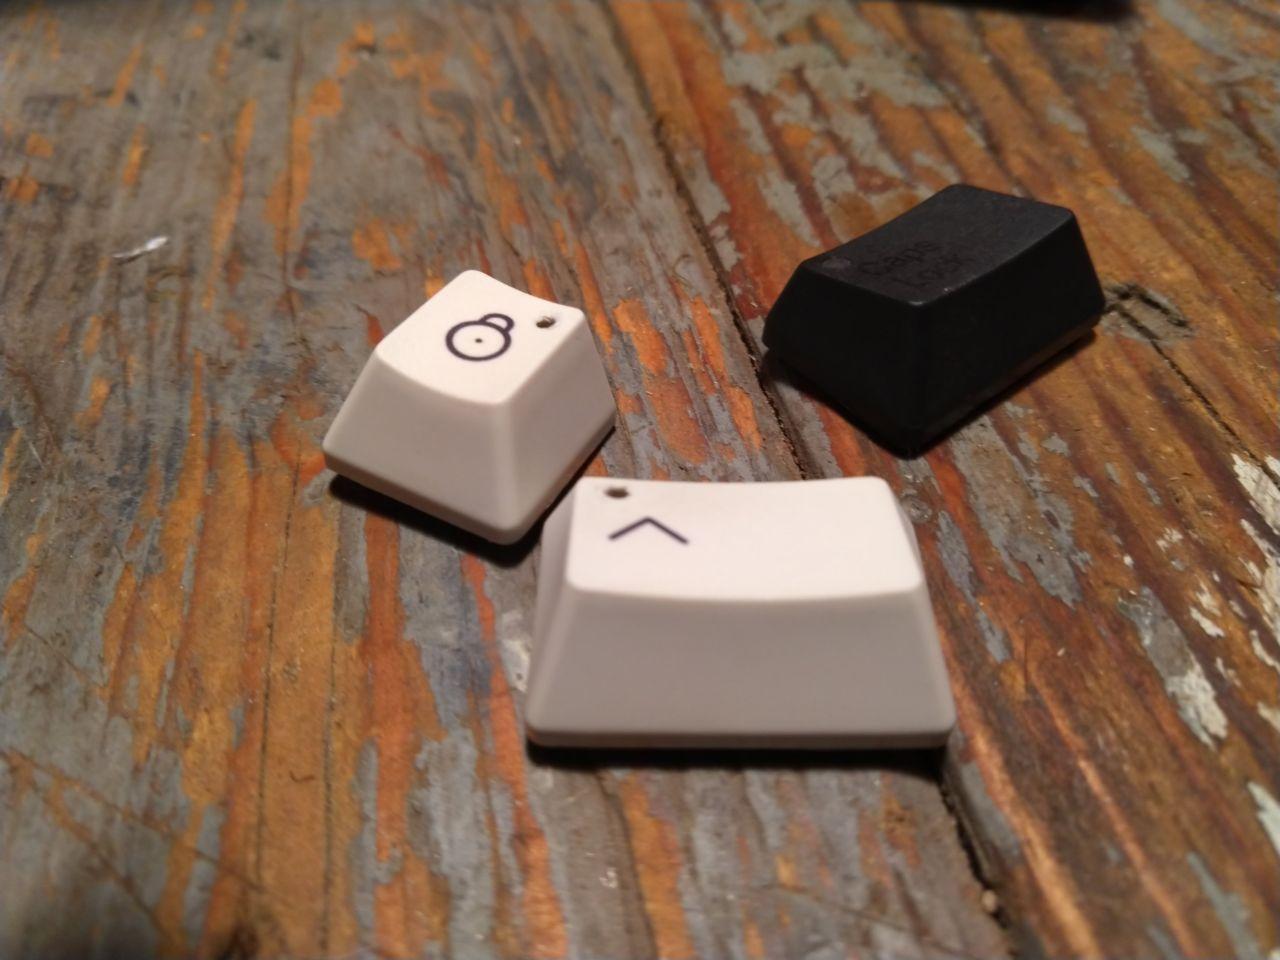 Keycaps with holes drilled through, next to the stock black keycap.